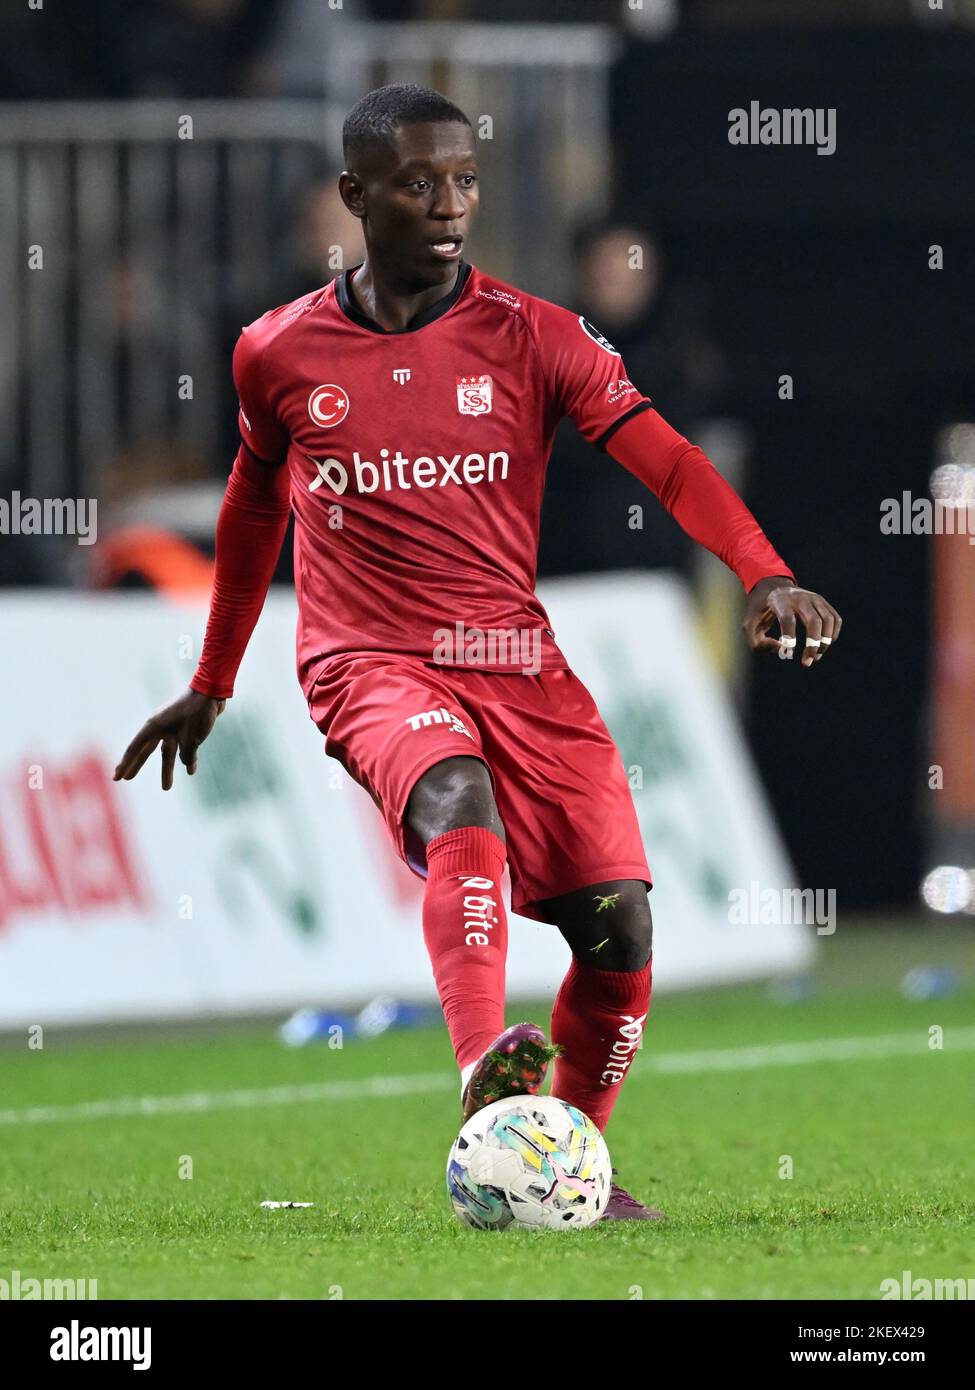 ISTANBUL - Max Alain Gradel of Demir Grup Sivasspor during the Turkish Super Lig match between Fenerbahce AS and Demir Grup Sivasspor at Ulker stadium on November 7, 2022 in Istanbul, Turkey. ANP | Dutch Height | GERRIT FROM COLOGNE Stock Photo